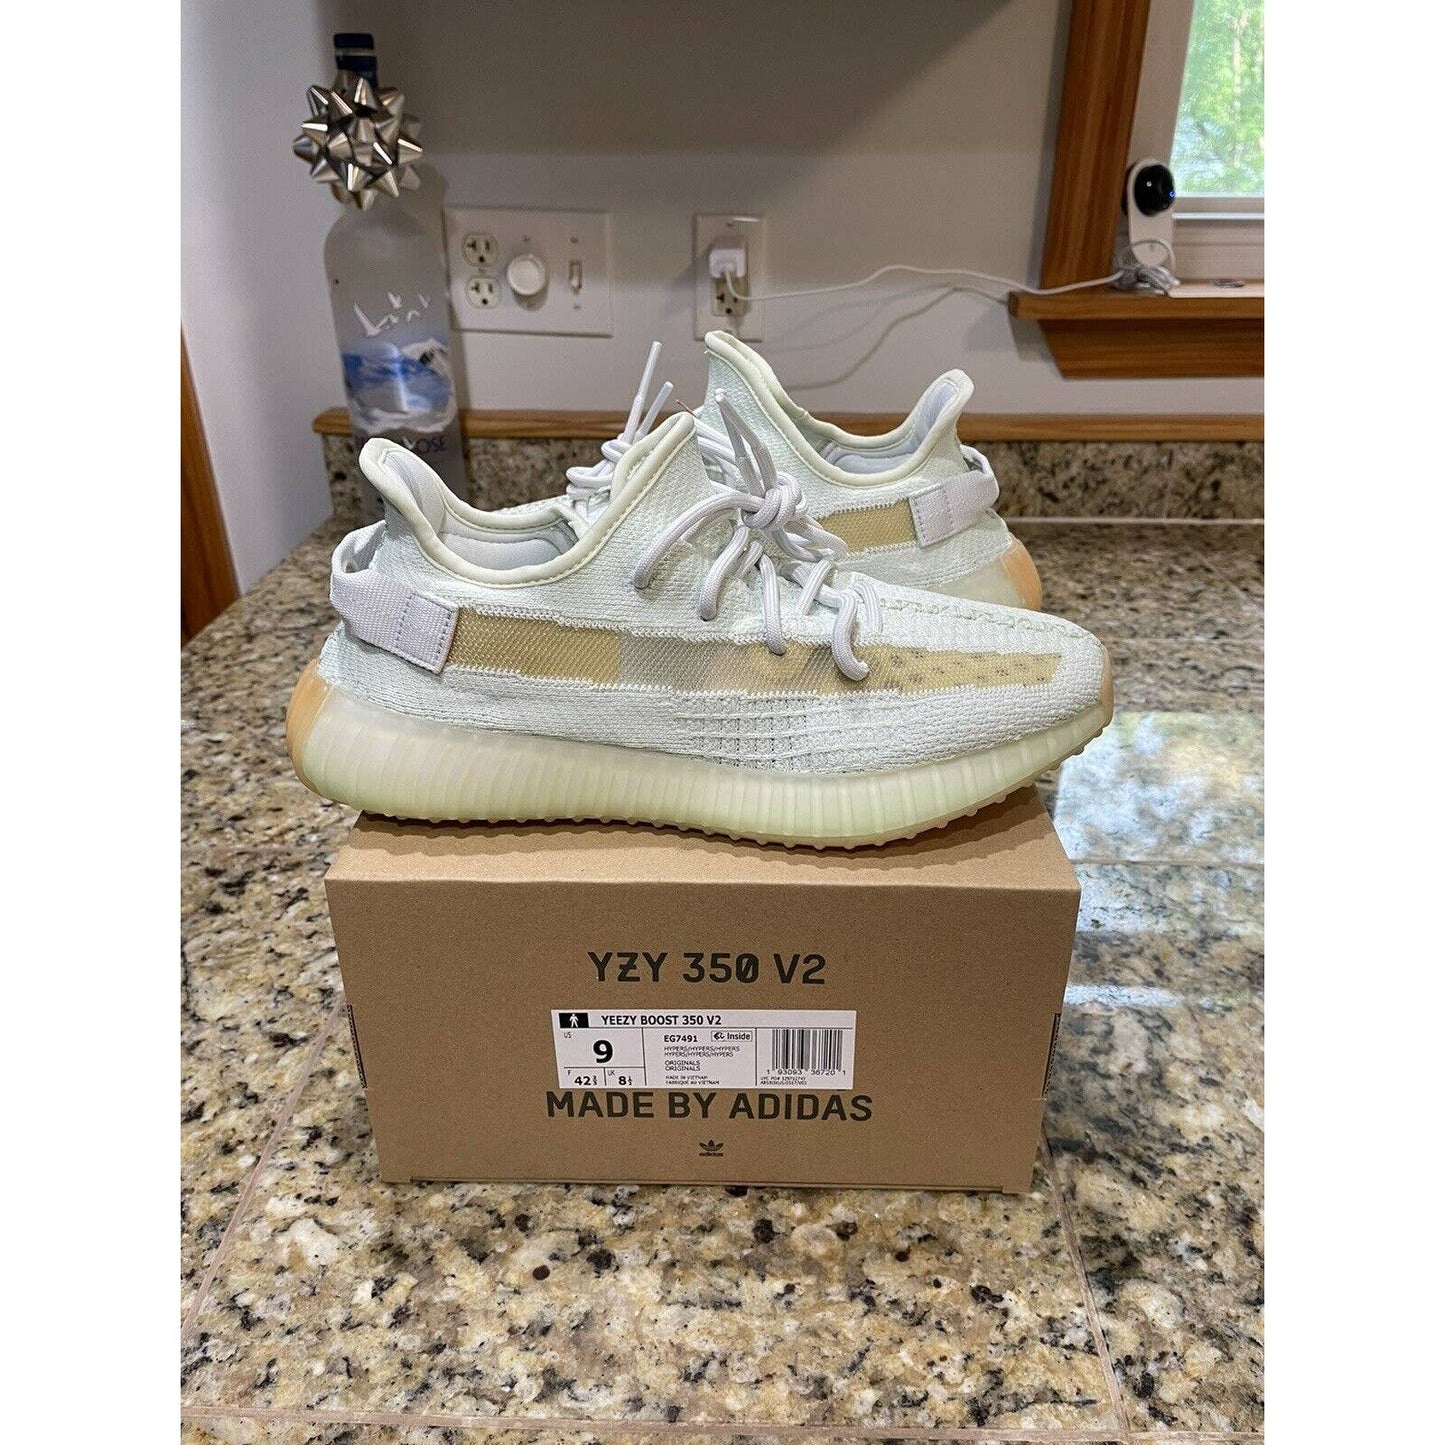 DS Adidas Yeezy 350 v2 Hyperspace Men’s Size 9 *SHIPS FAST*